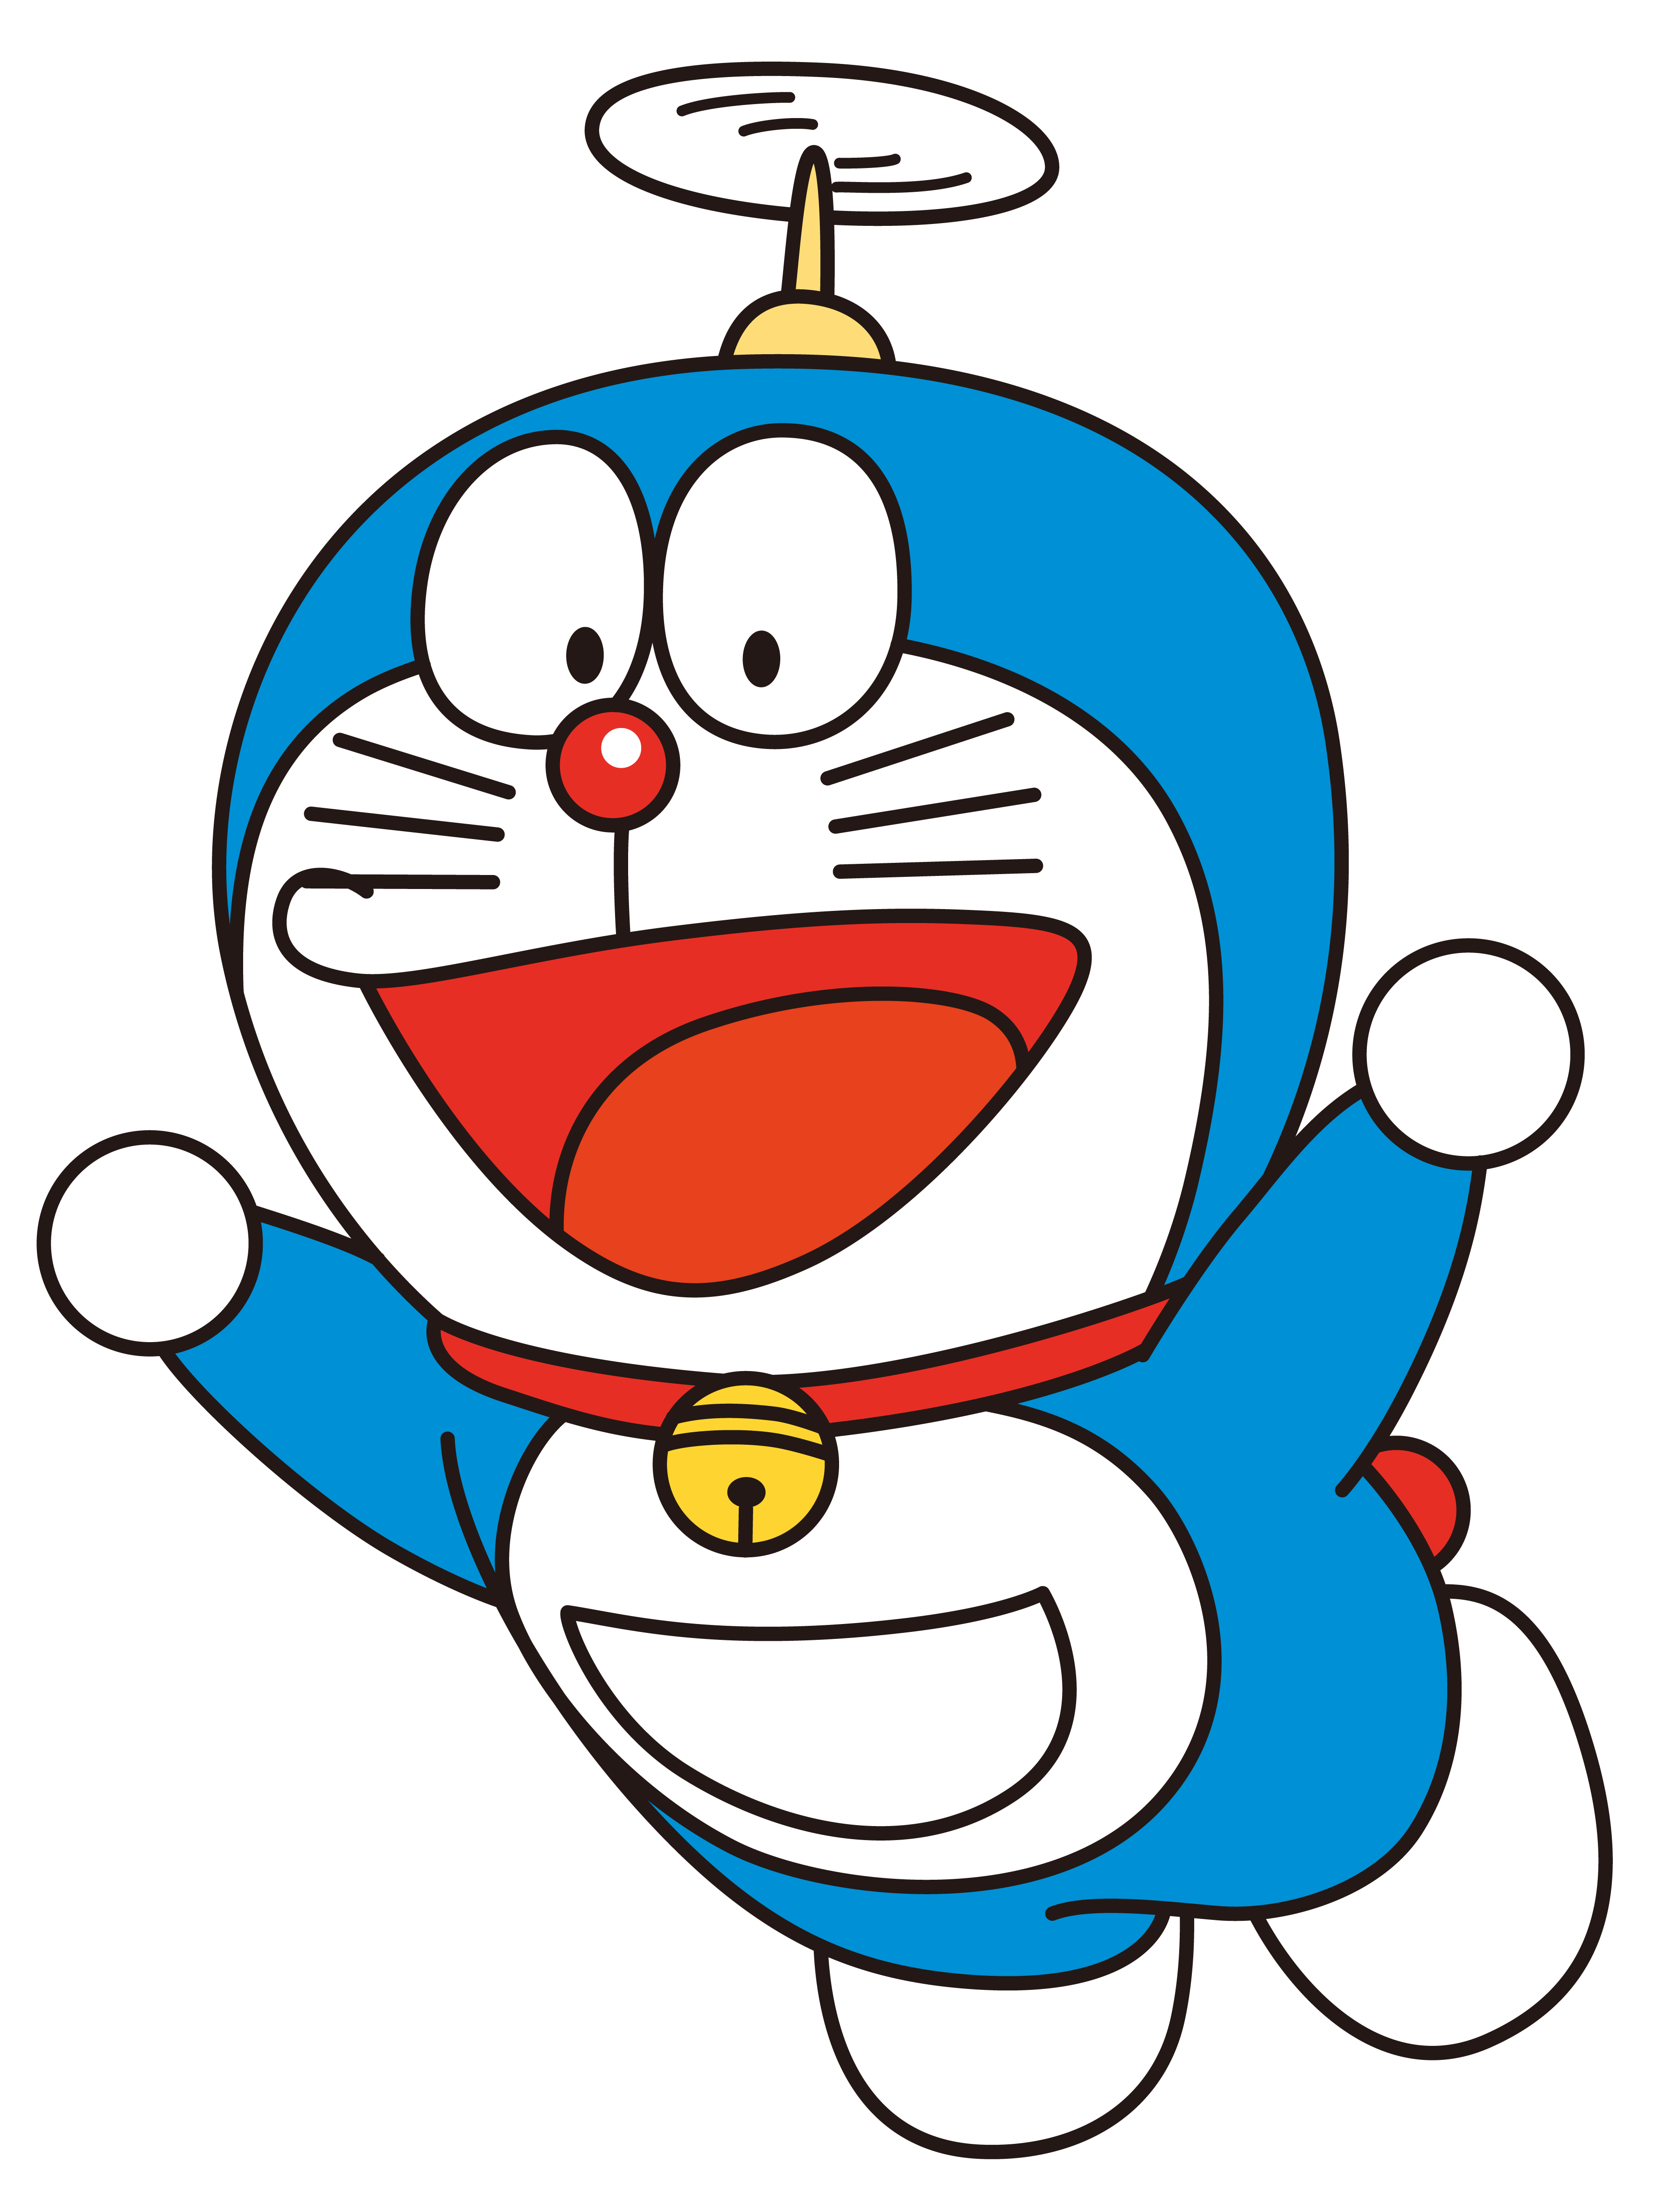 Doraemon Png 2264410 Hd Wallpaper And Backgrounds Download